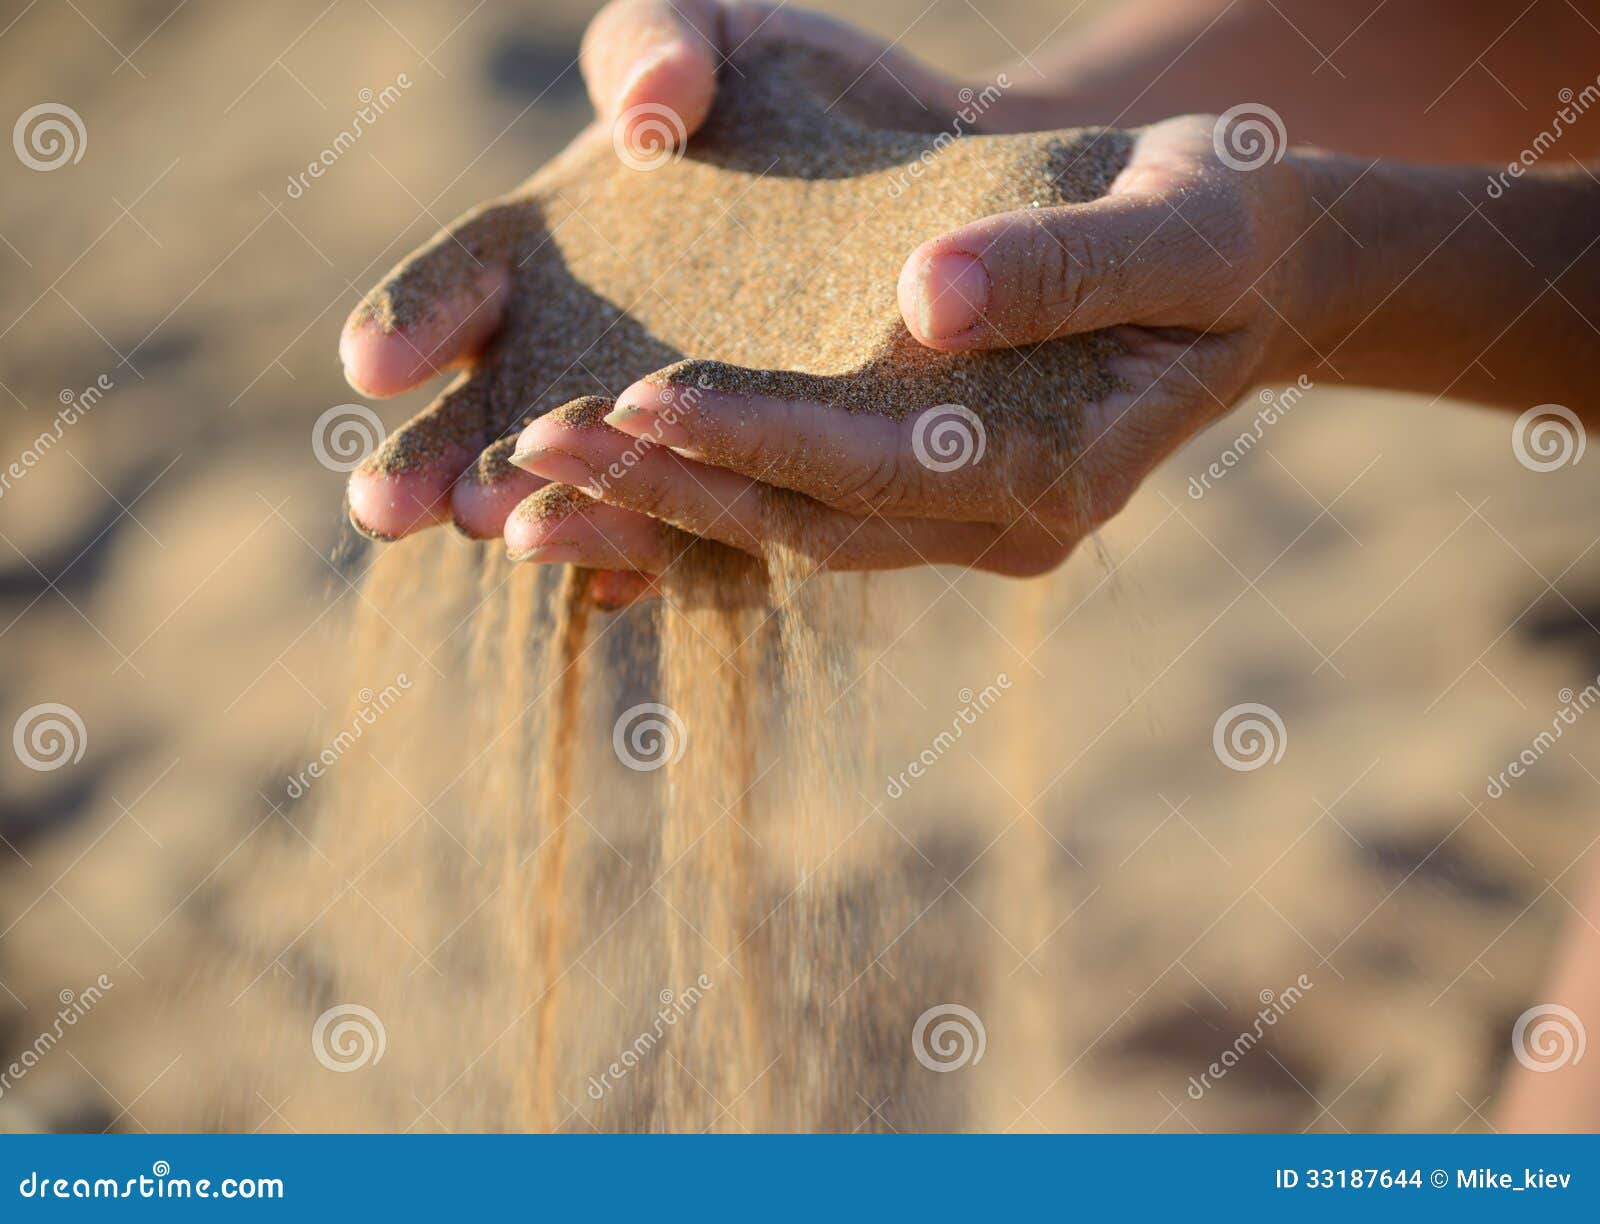 sand pours out of the hands